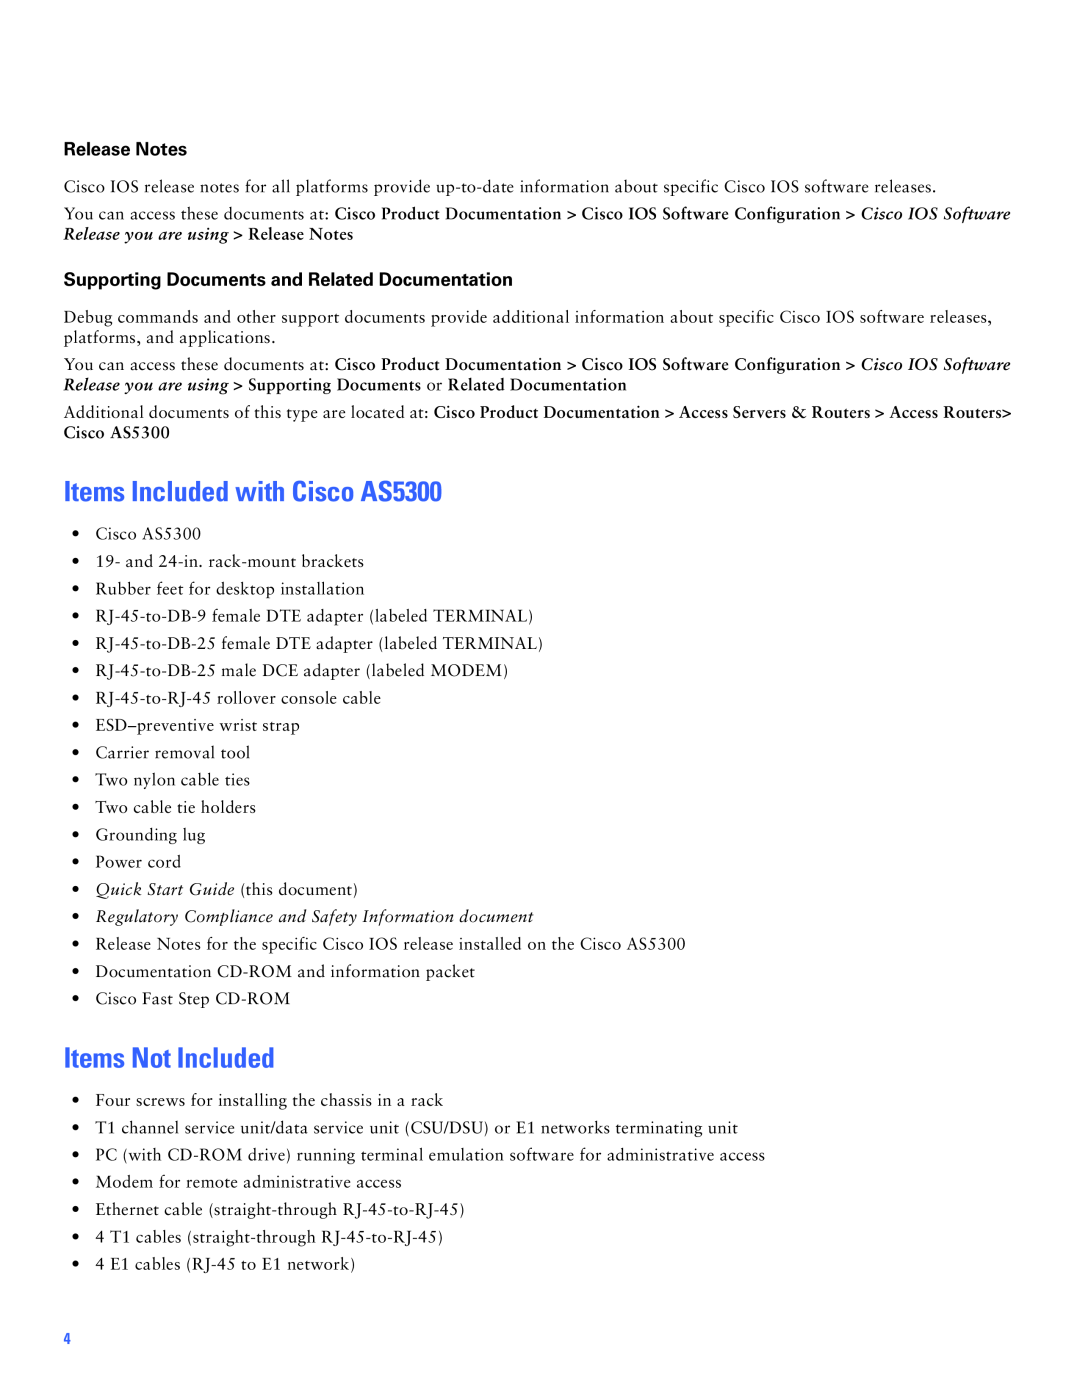 Cisco Systems Items Included with Cisco AS5300, Items Not Included, Supporting Documents and Related Documentation 